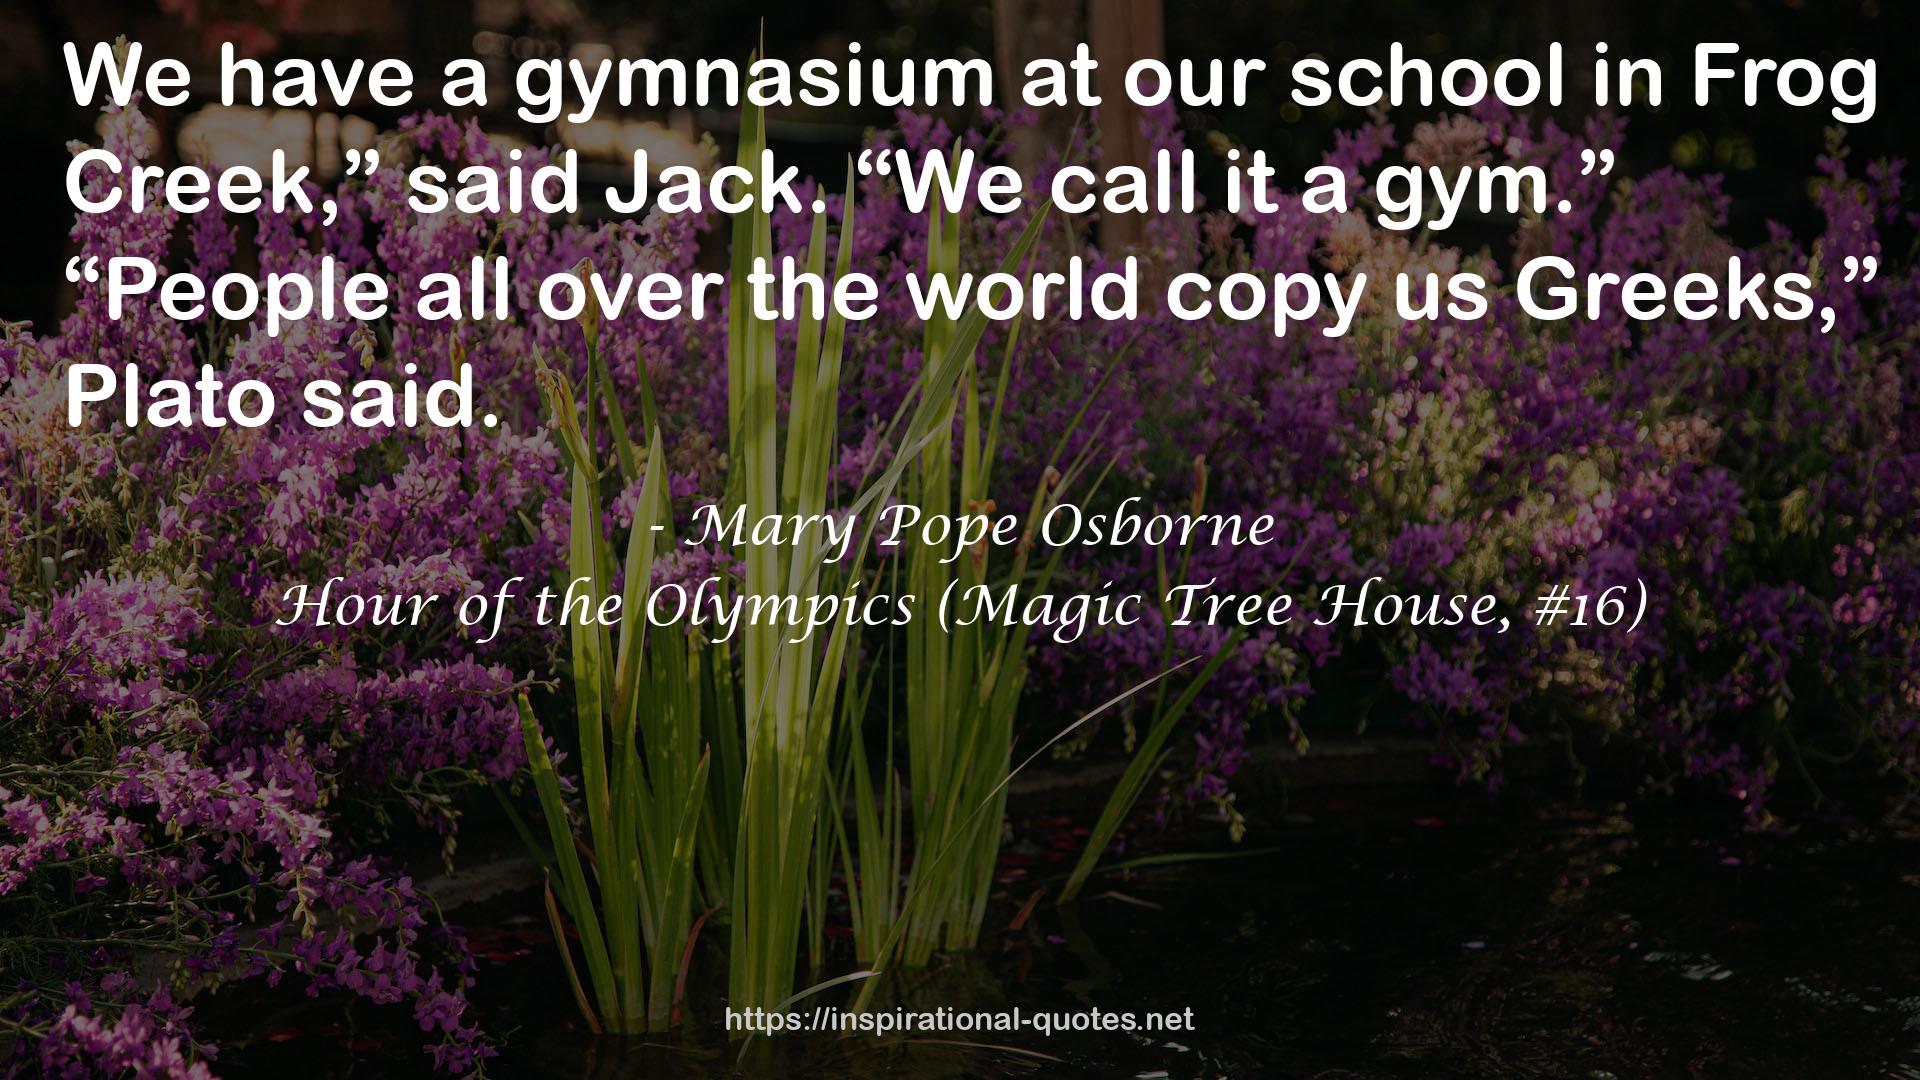 Hour of the Olympics (Magic Tree House, #16) QUOTES